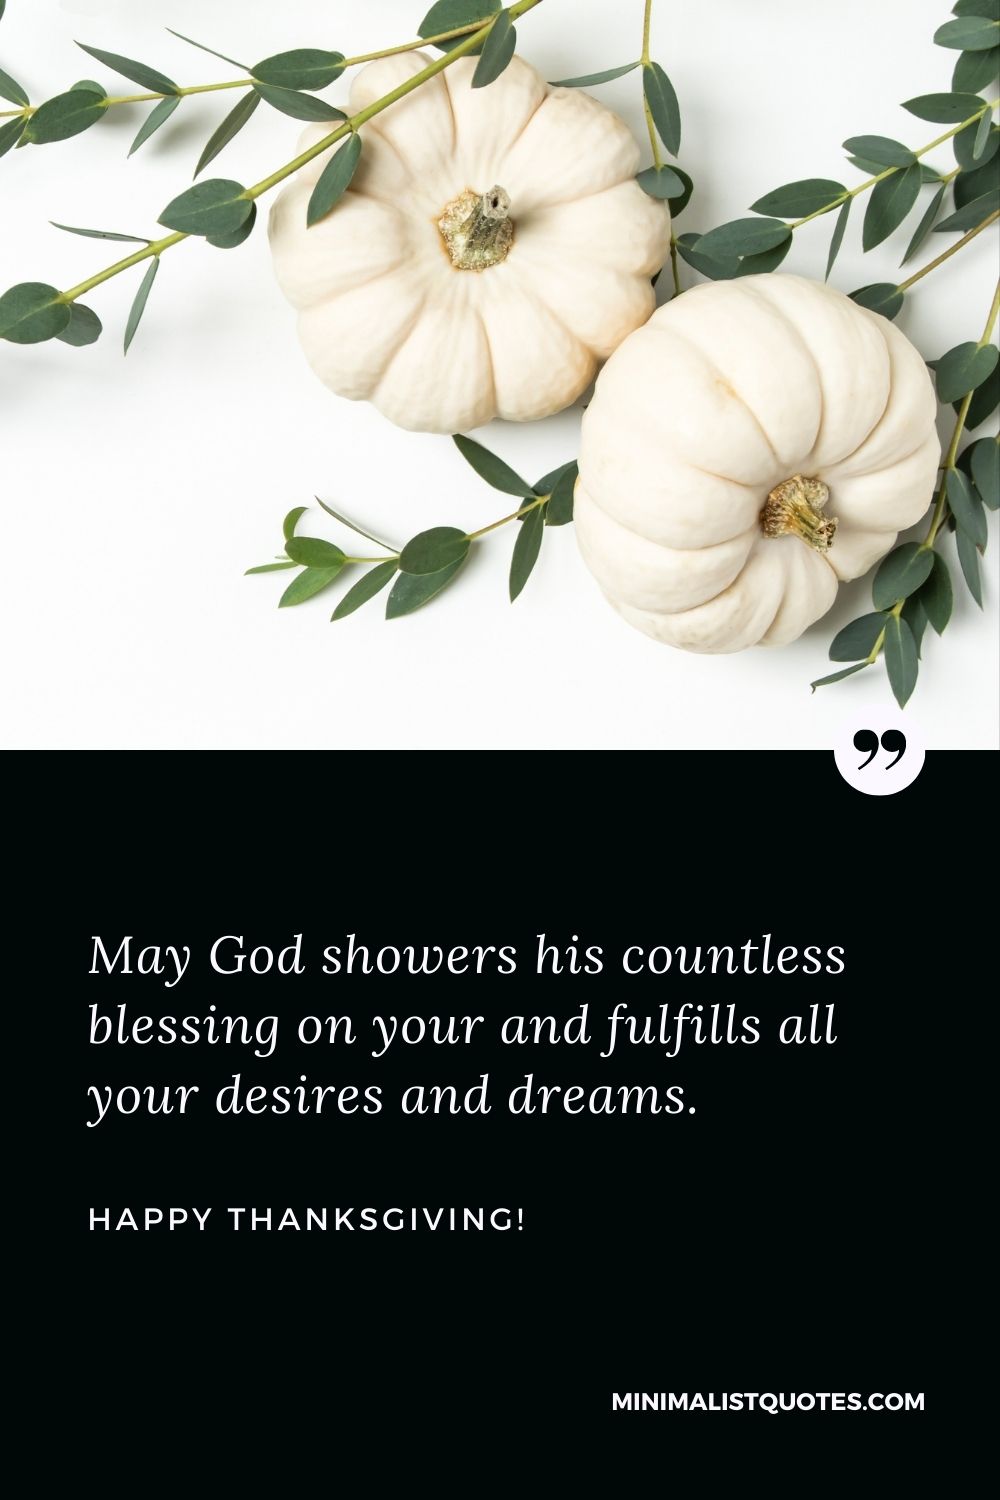 Thanksgiving message to friends: May God showers his countless blessing on your and fulfills all your desires and dreams. Happy Thanksgiving!